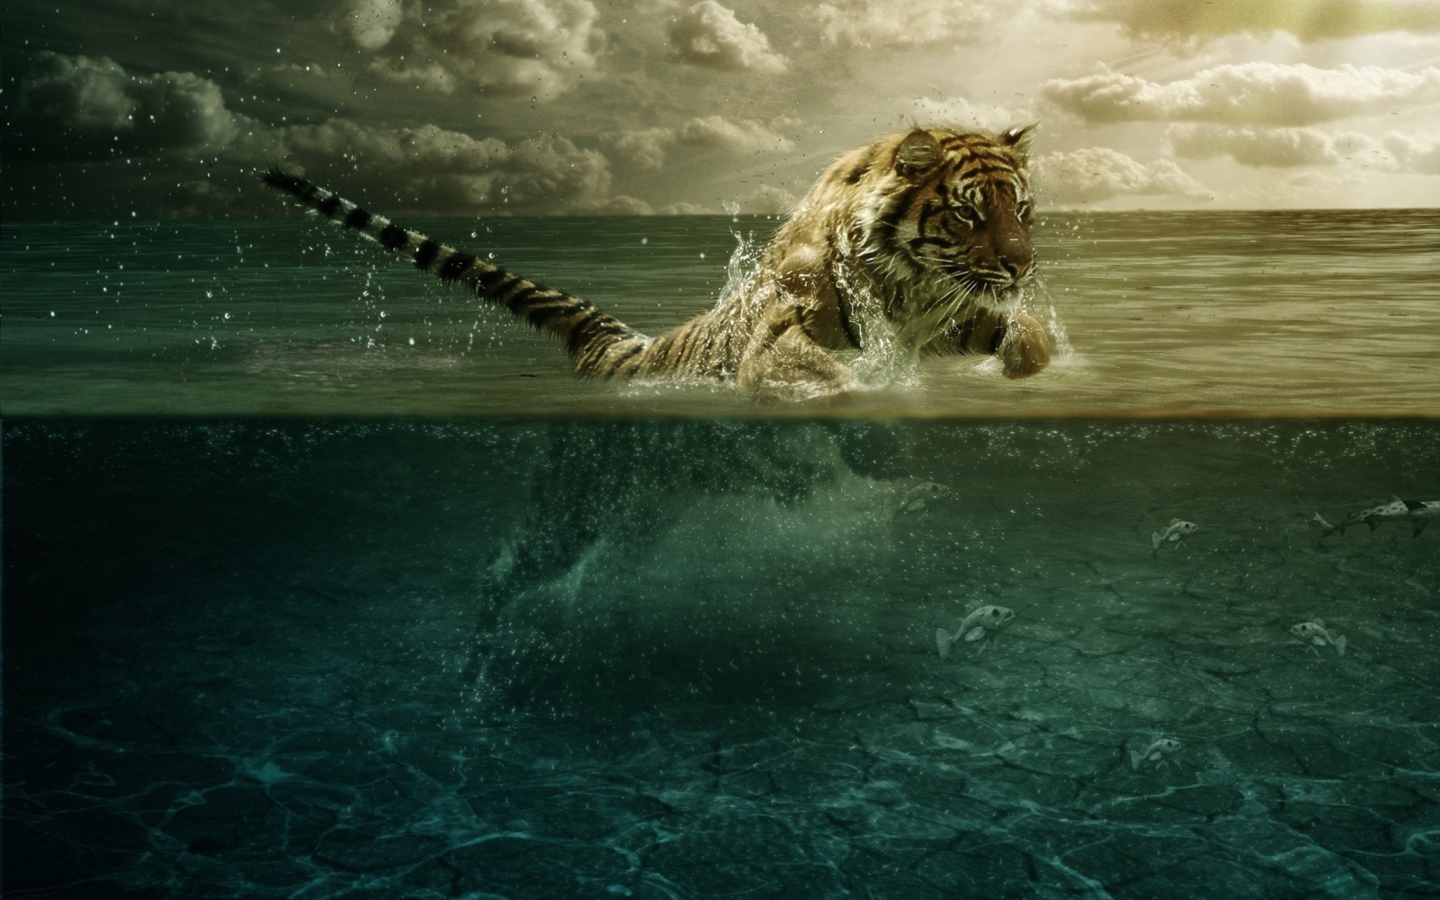 Tiger Jumping In Water wallpaper 1440x900